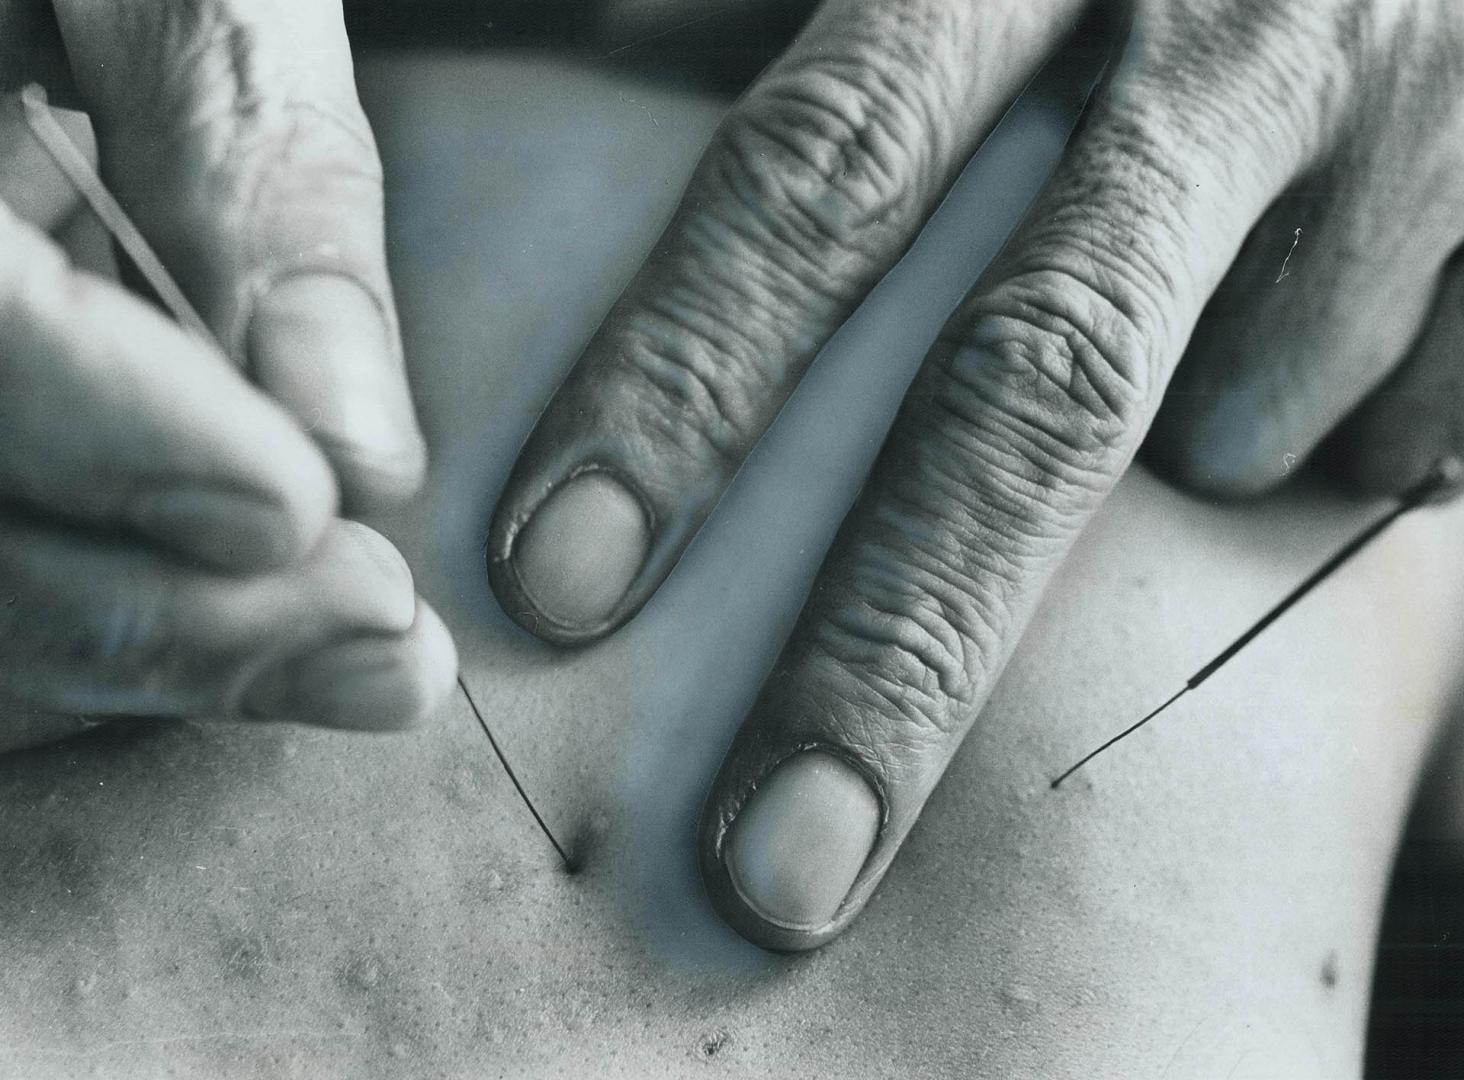 A close-up of a needle being inserted in patient, Acupuncture needles are as fine as a human hair